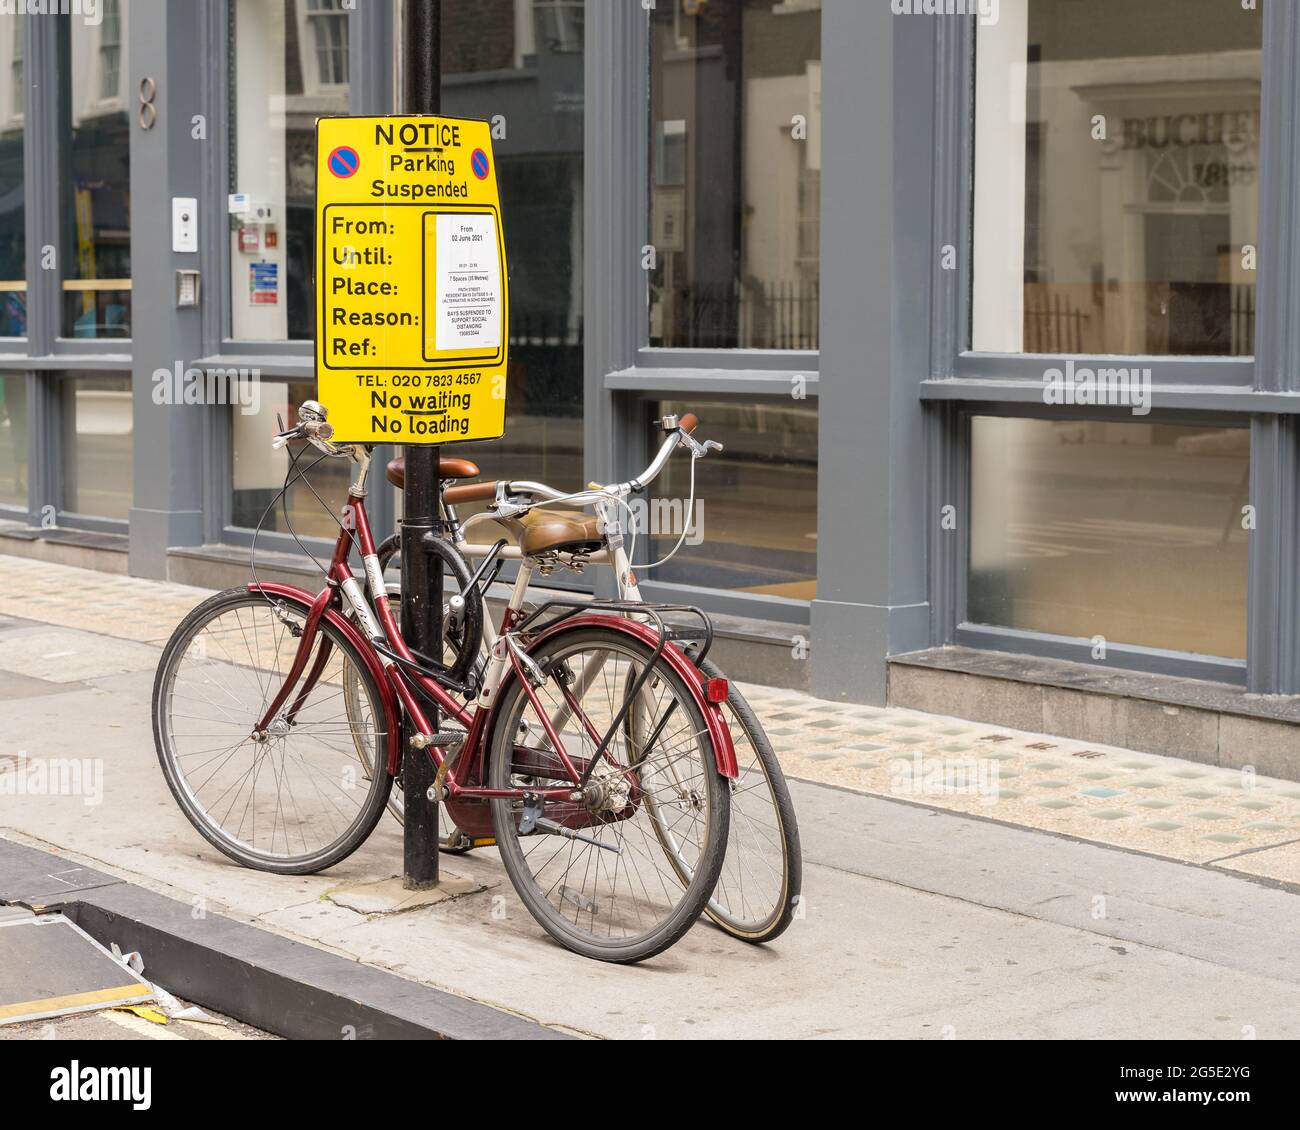 Parking suspended sign on a lamppost with two bicycles chained up underneath. London - 26th June 2021 Stock Photo